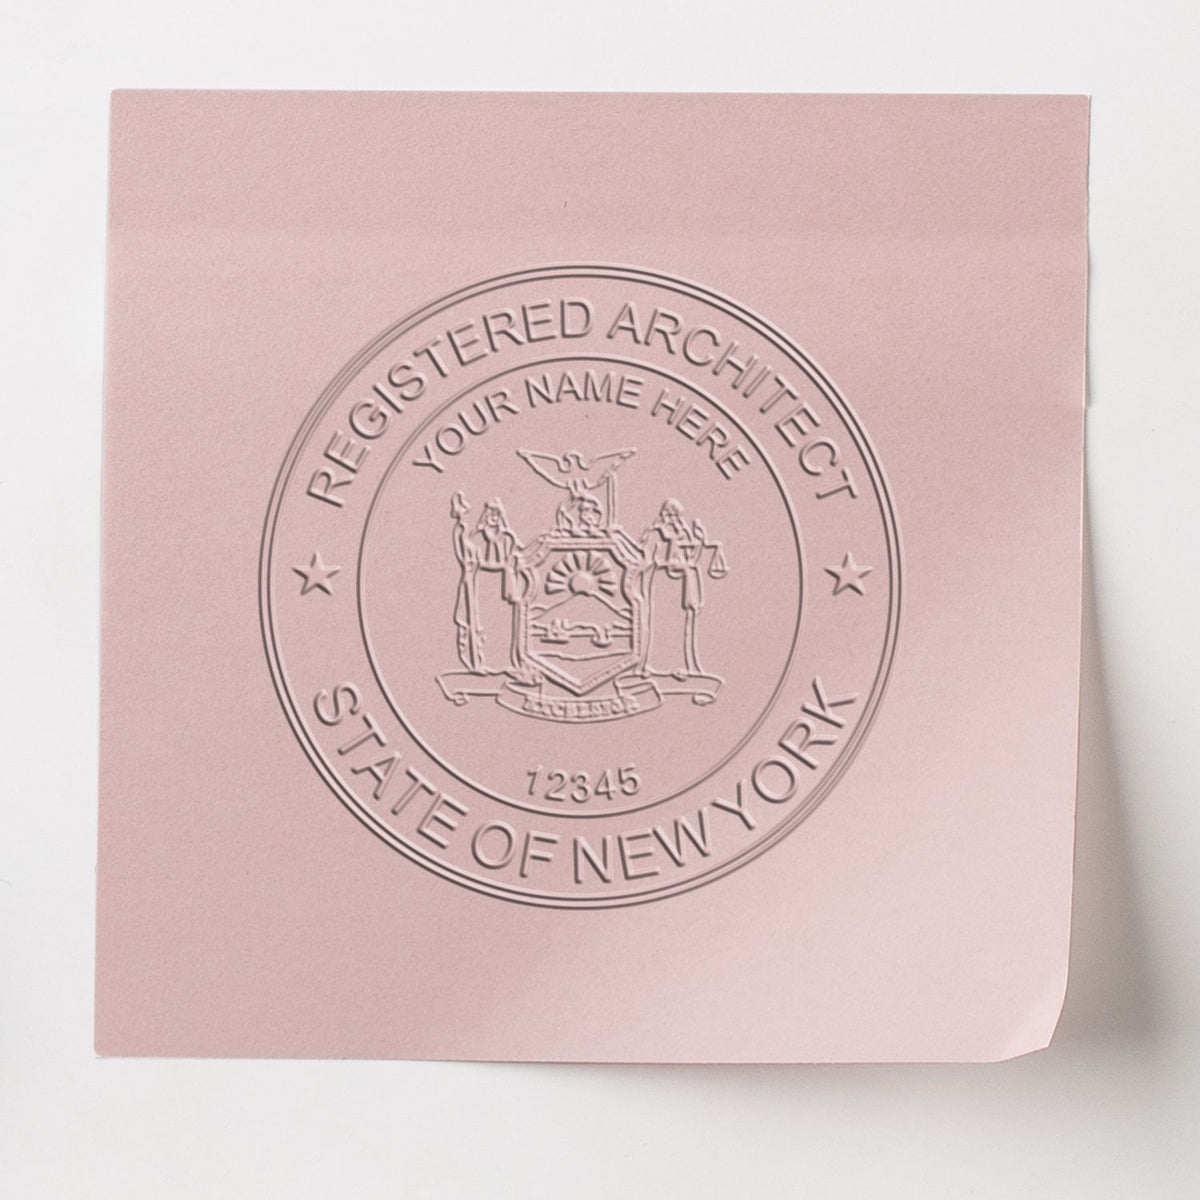 An in use photo of the Gift New York Architect Seal showing a sample imprint on a cardstock